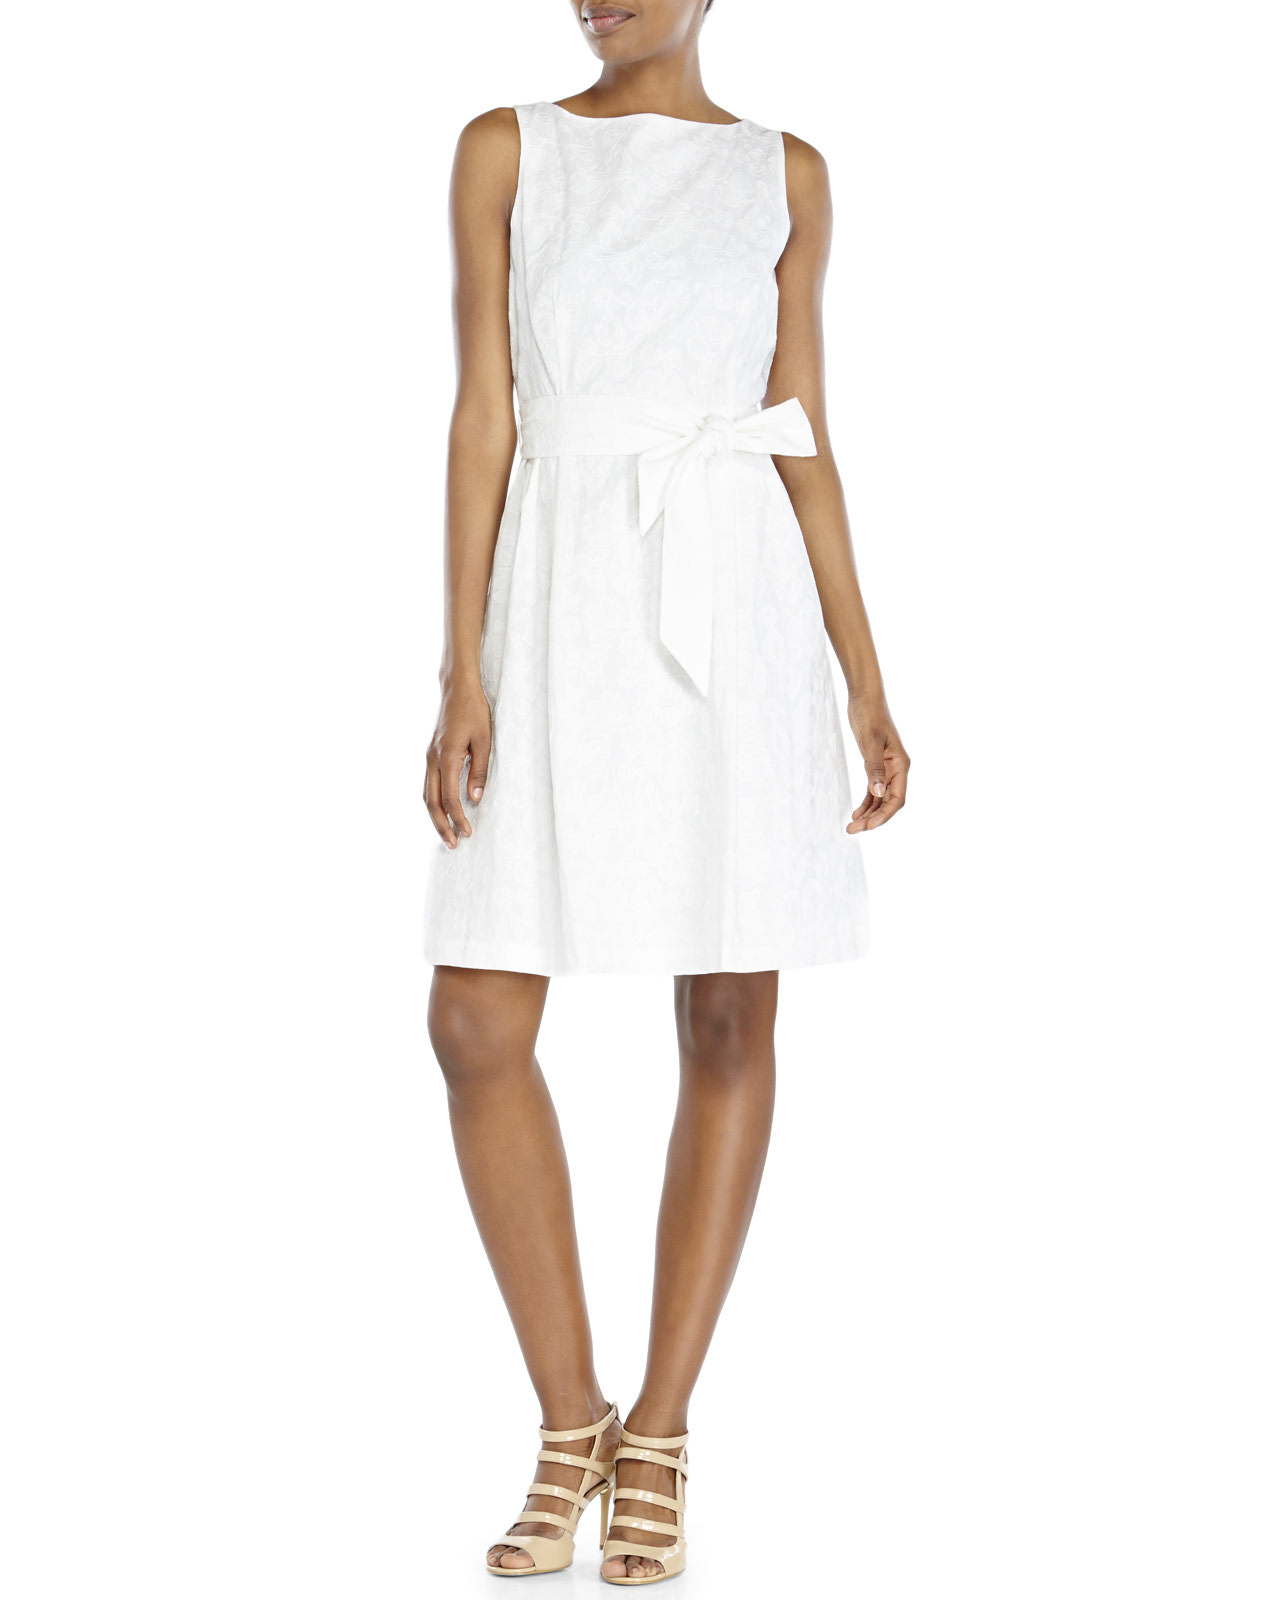 Lyst - Anne Klein Petite White Floral Belted Woven Dress in White